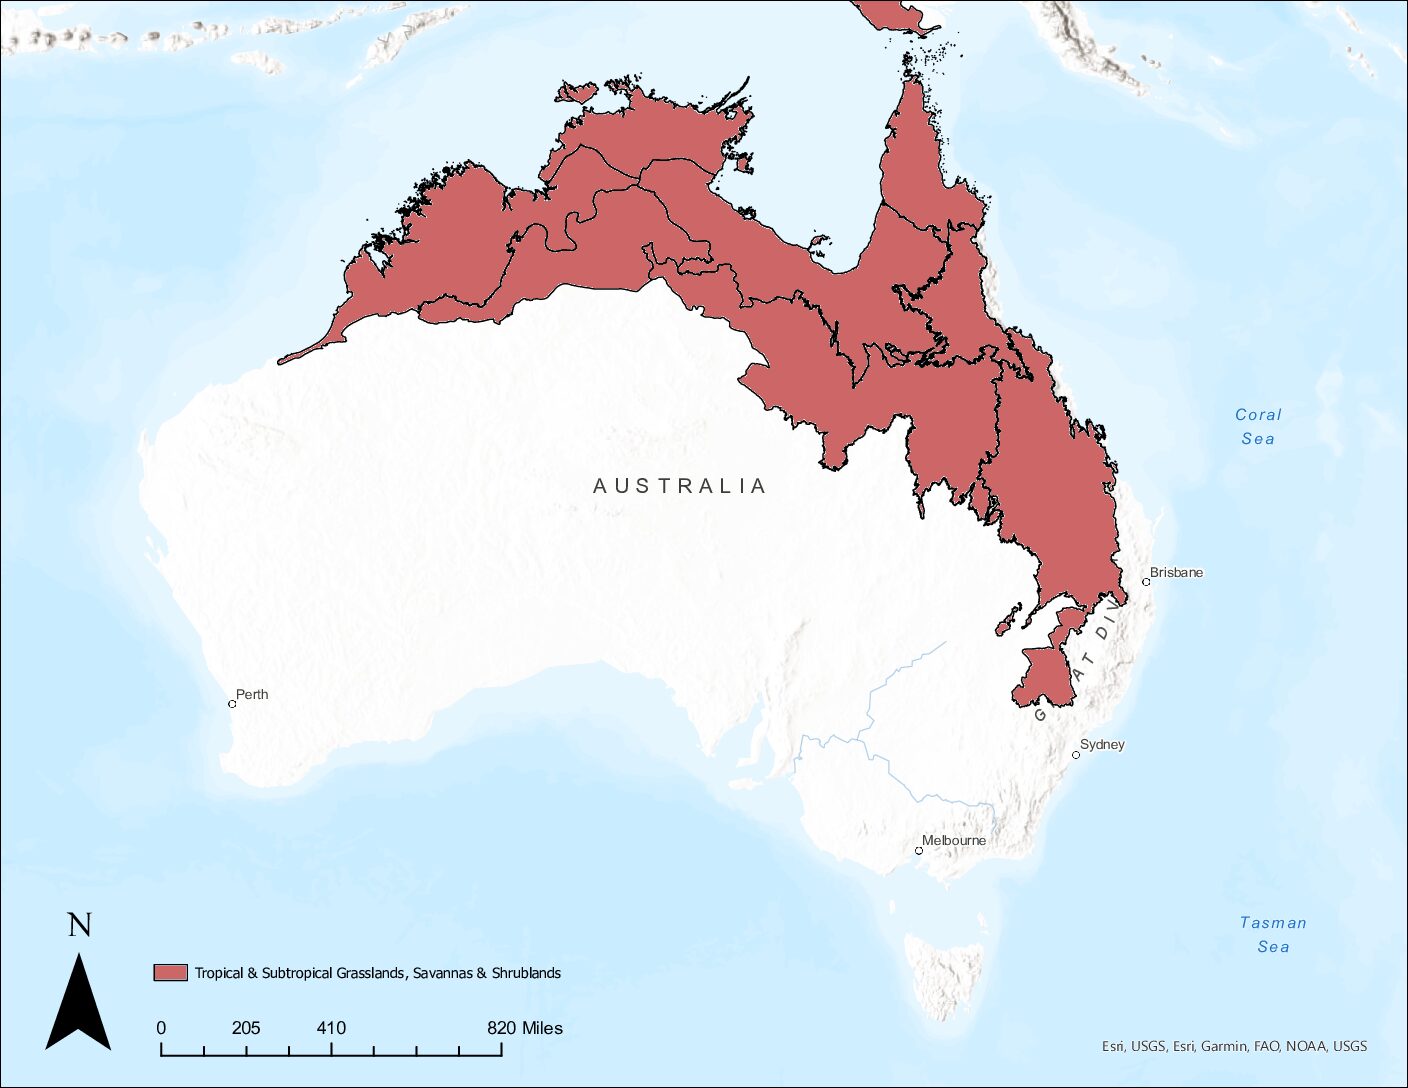 Map showing the distribution of grasslands in Australia; tropical and subtropical grasslands, savannas, and shrublands are shaded pink. Grasslands extend over much of the northern part of Australia and midway down the eastern side near the coast.